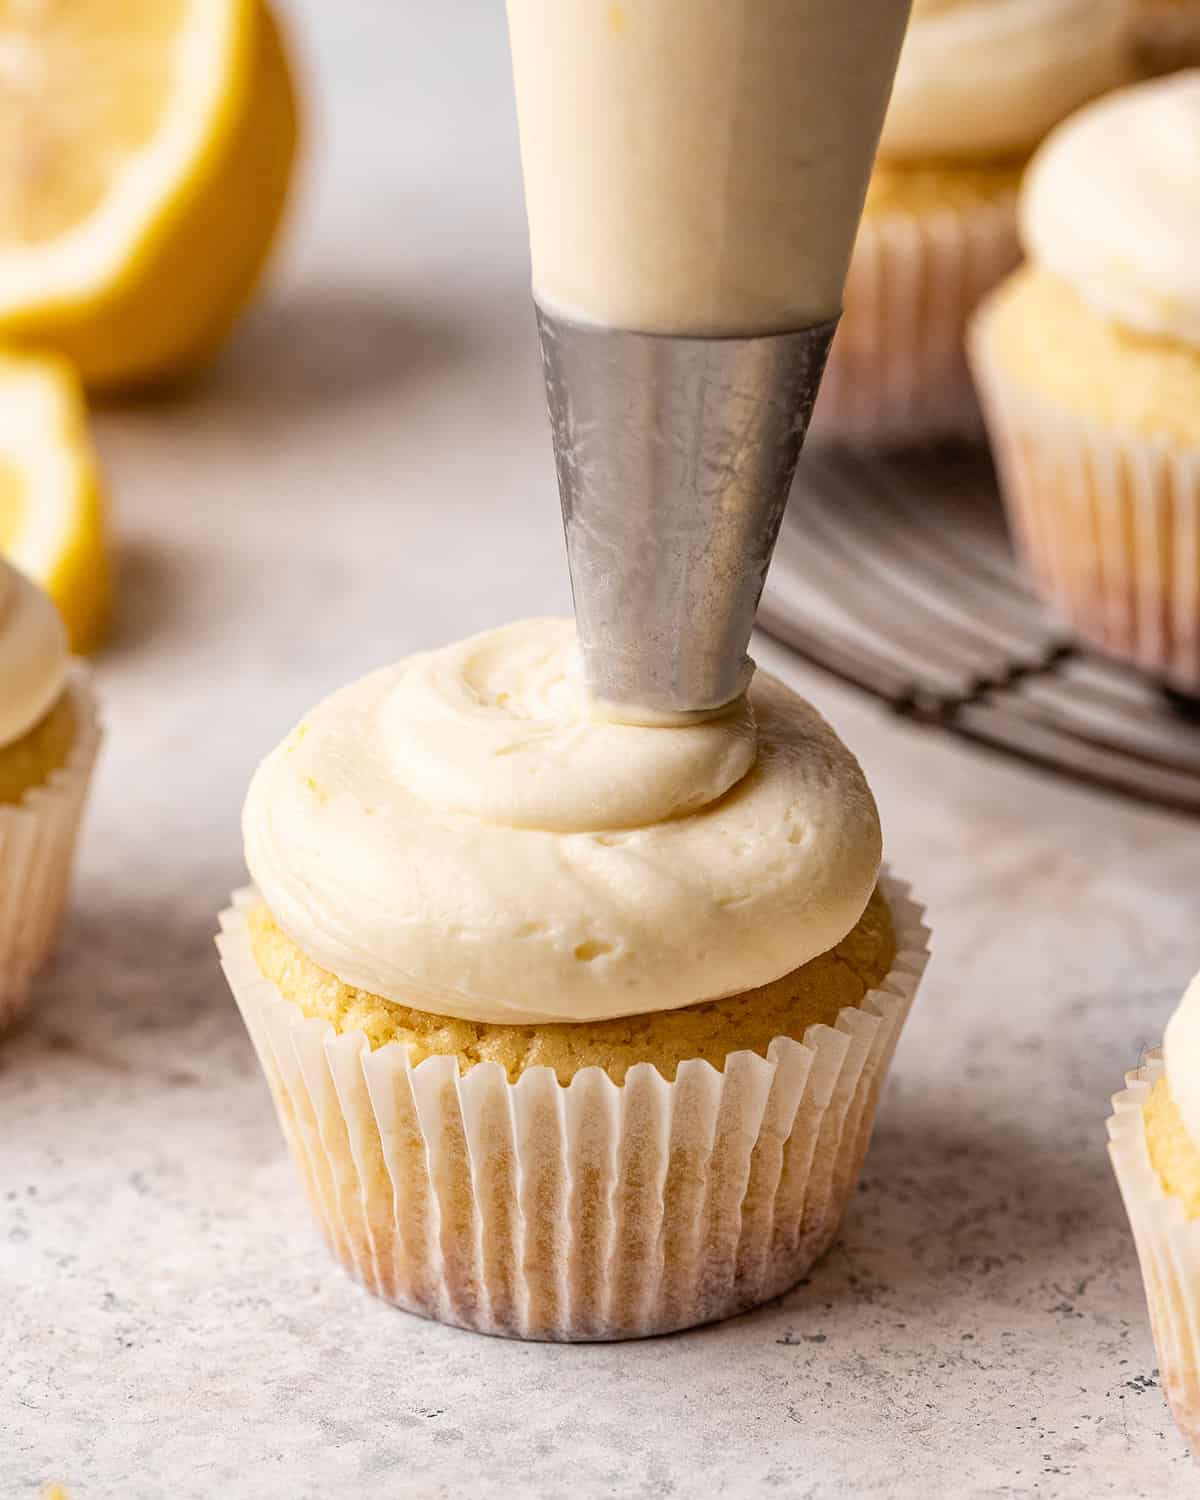 Lemon Buttercream Frosting being piped on top of a cupcake with a pastry bag